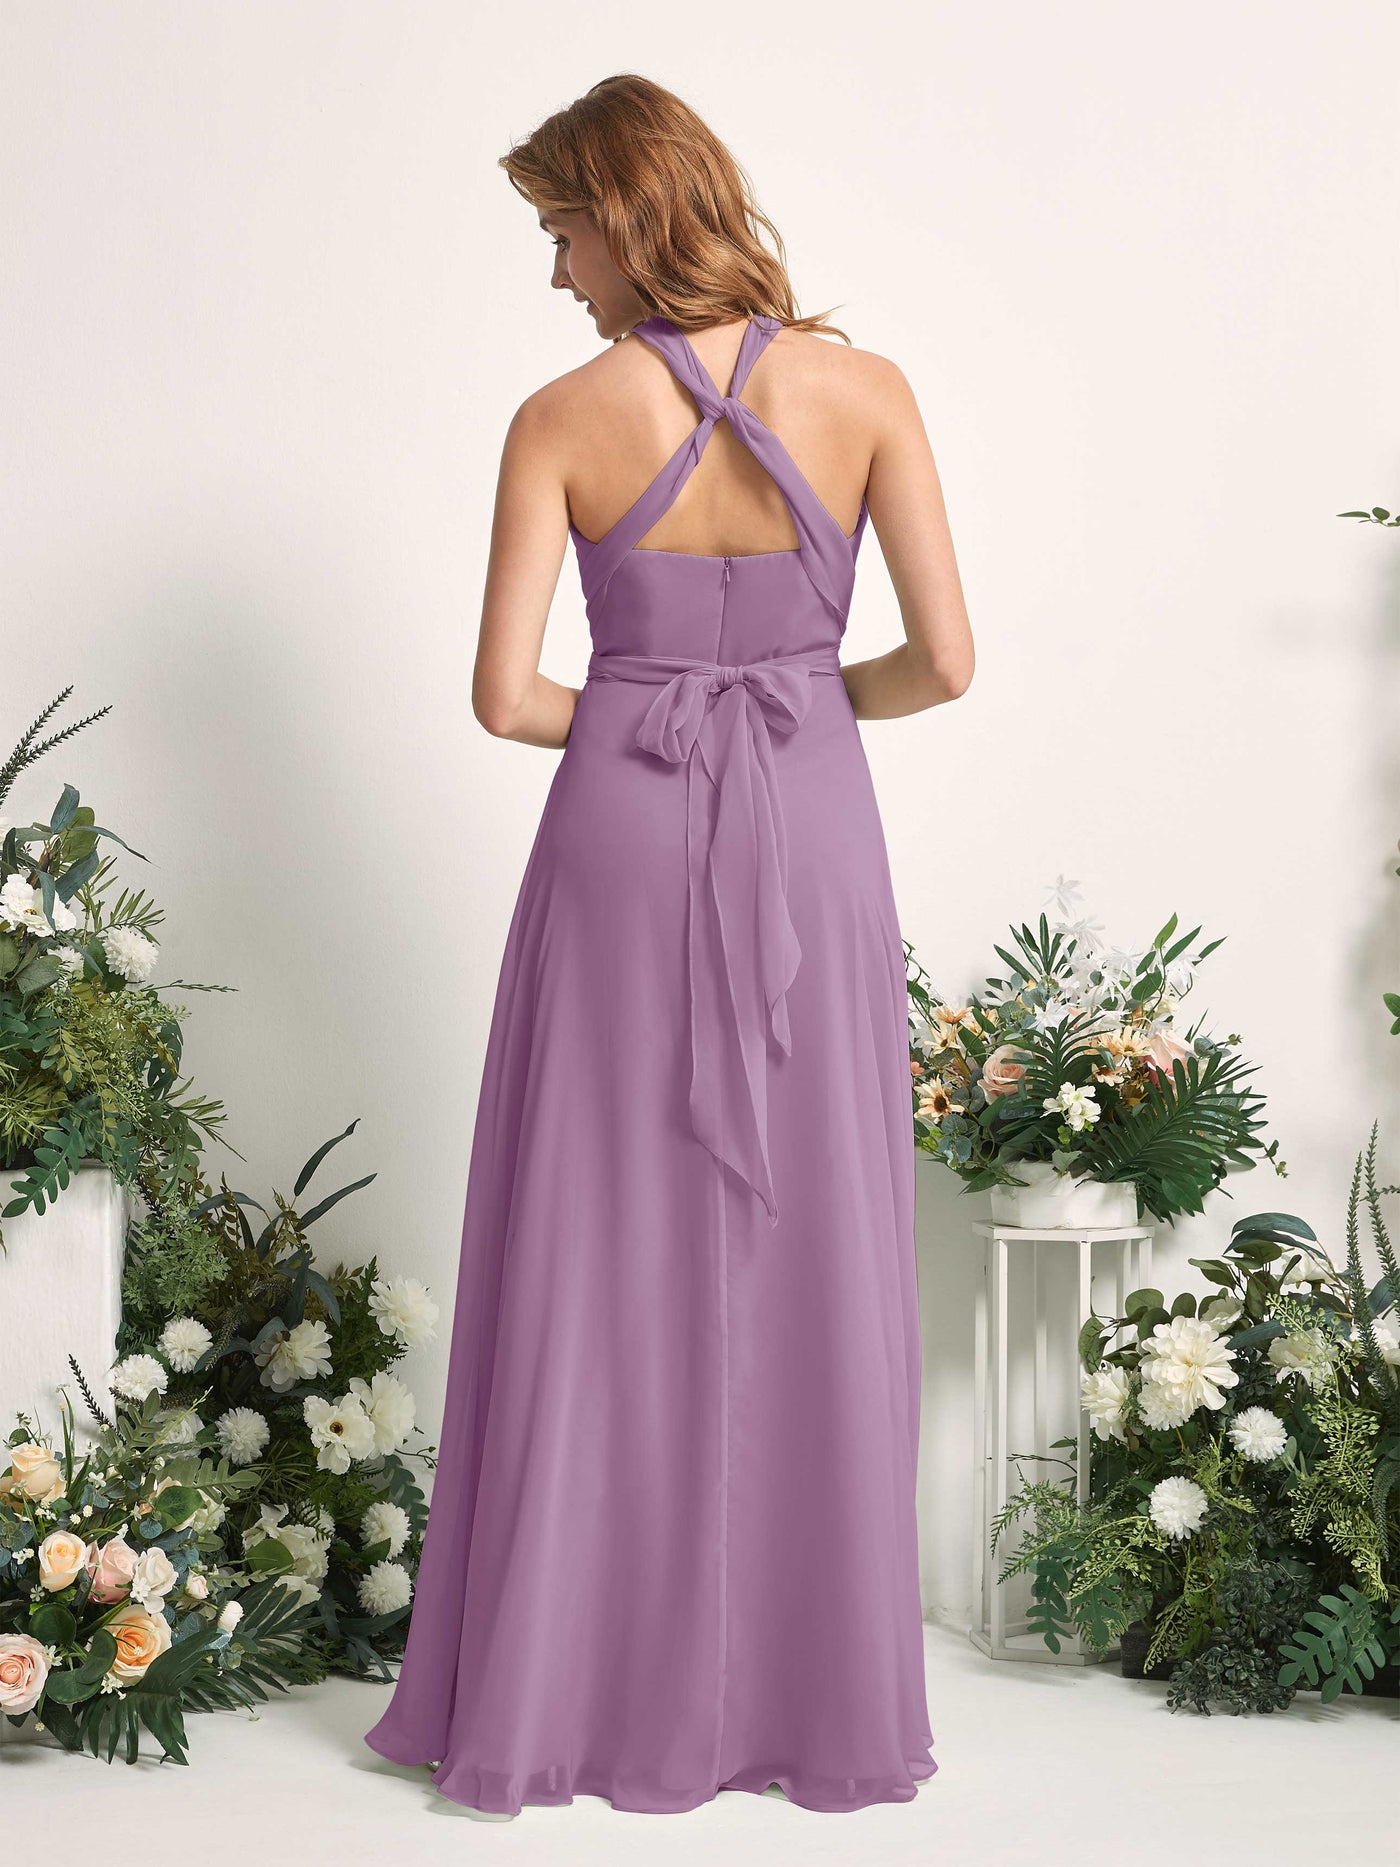 Bridesmaid Dress A-line Chiffon Halter Full Length Short Sleeves Wedding Party Dress - Orchid Mist (81226321)#color_orchid-mist